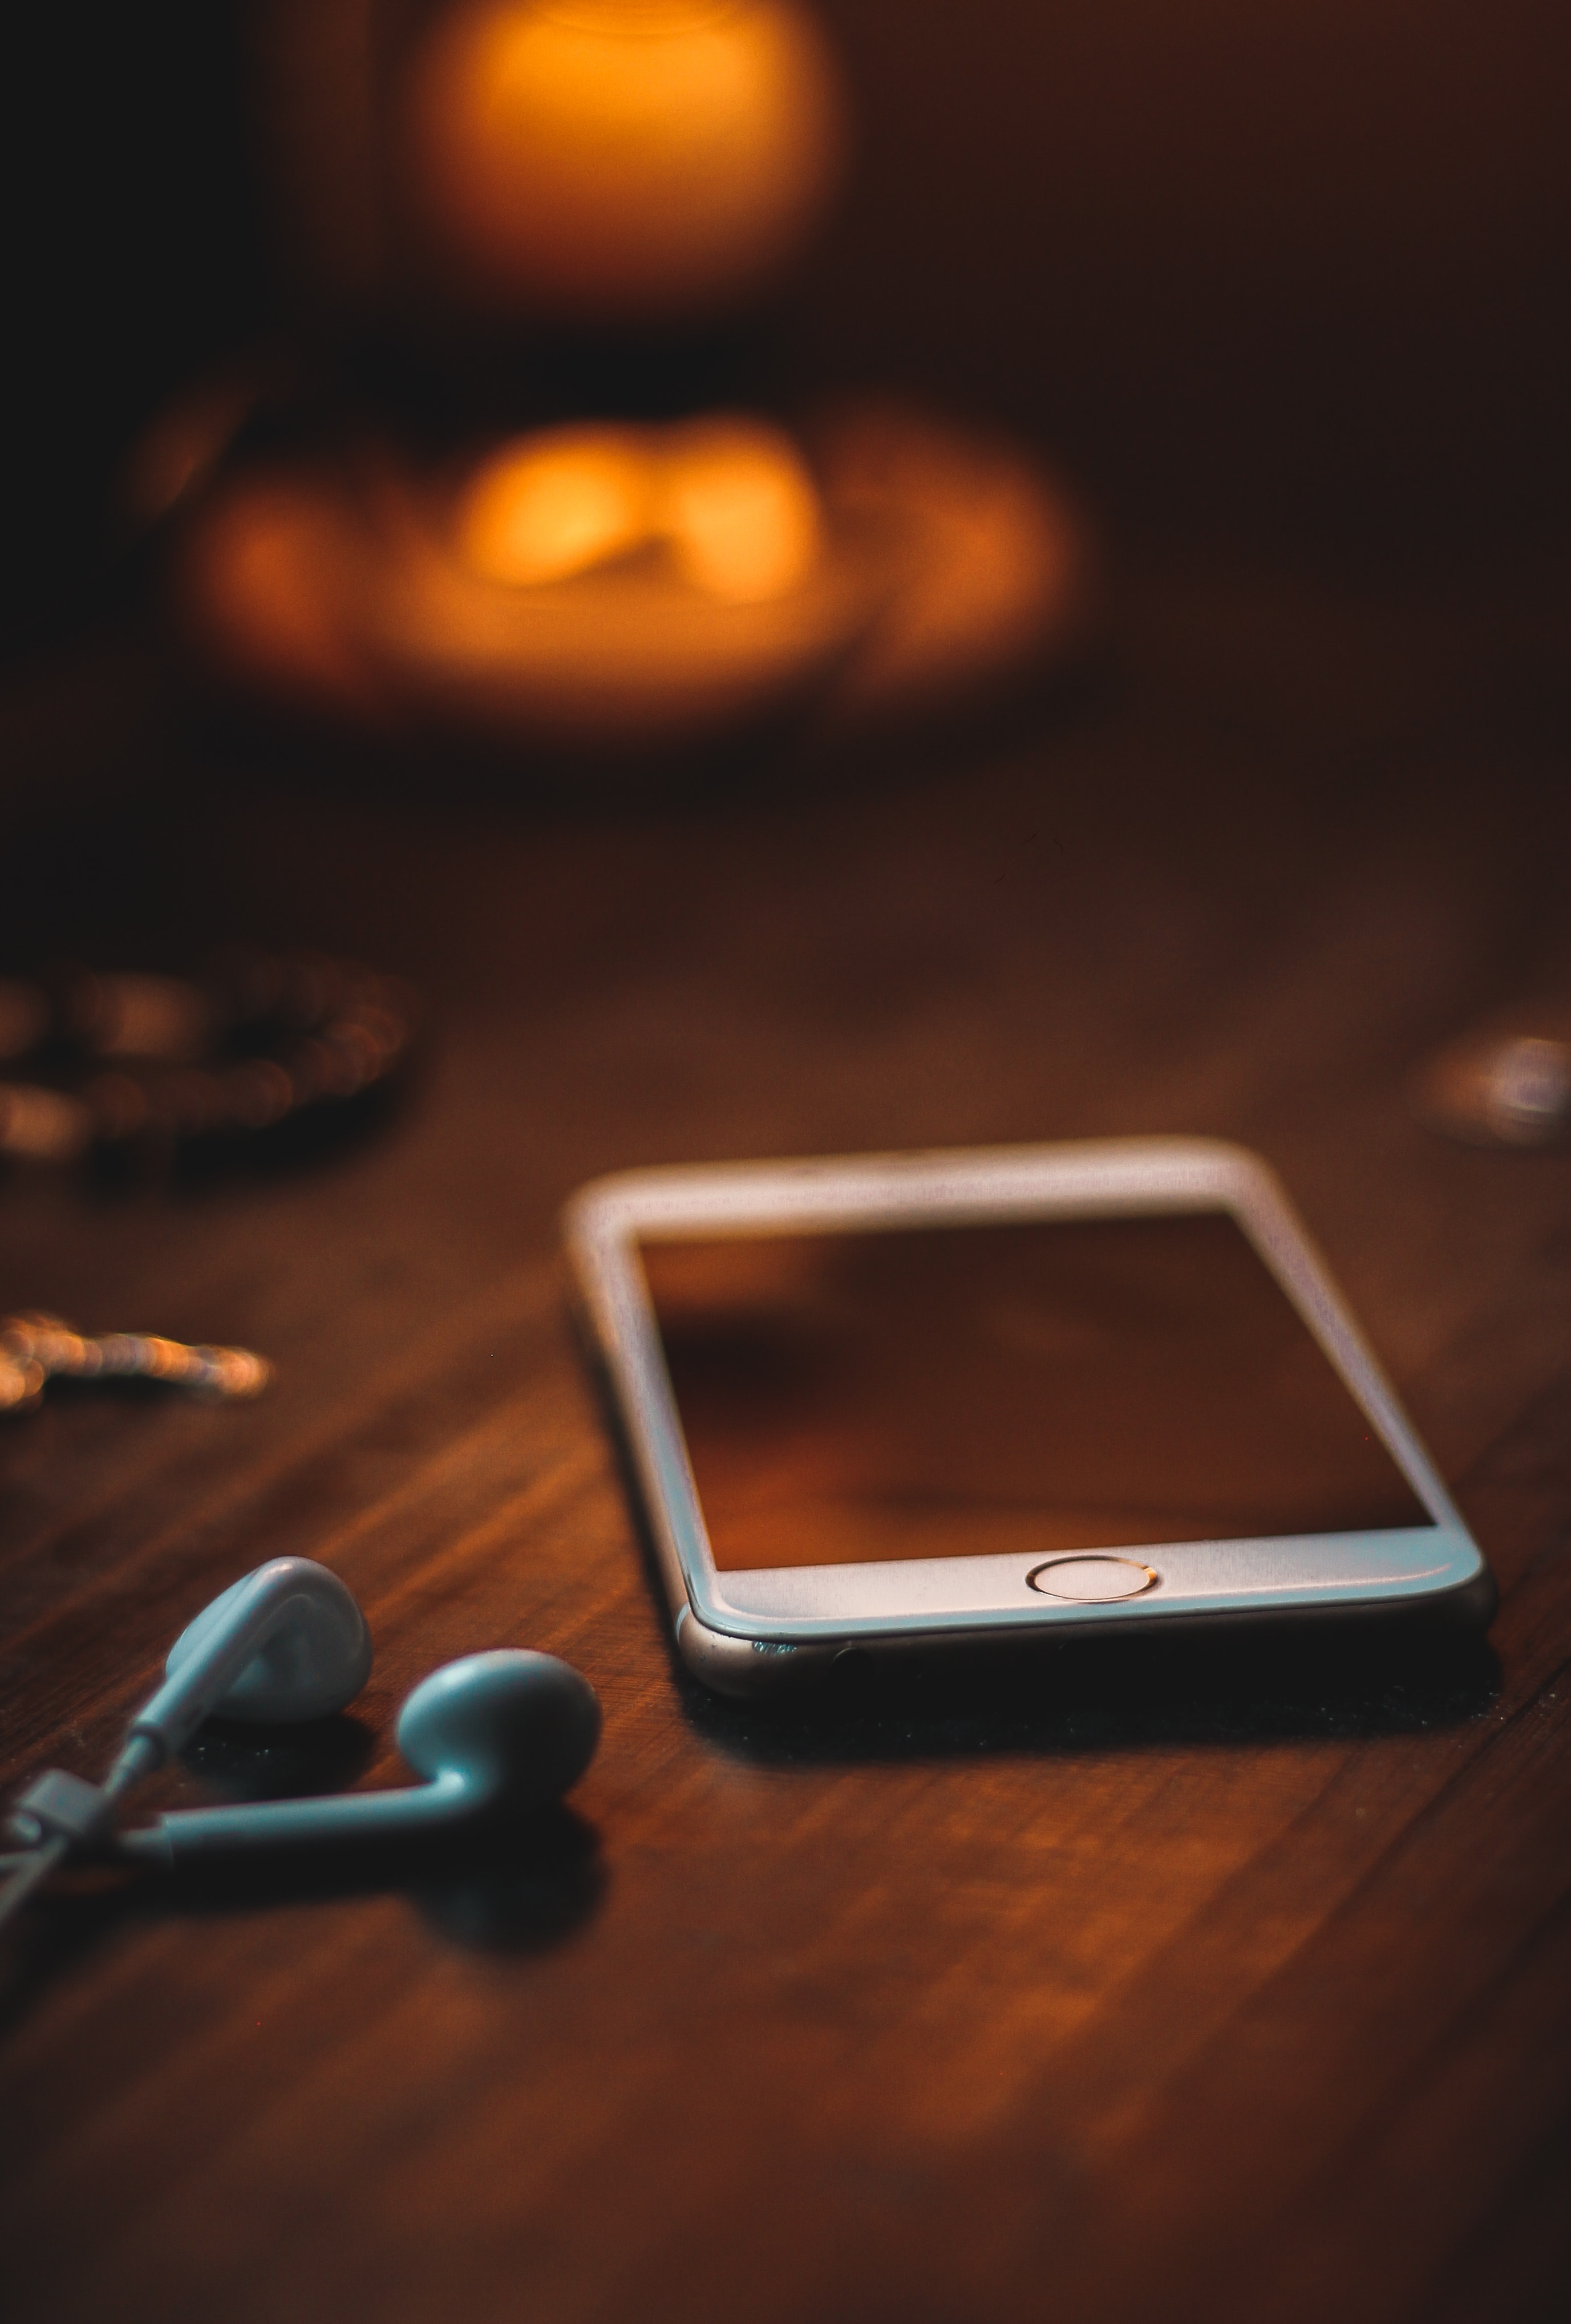 Smartphone with earphones on a wooden surface with a soft-focus candle in the background, suggesting a personal ambiance possibly related to a legal discussion about cellphone search warrants.